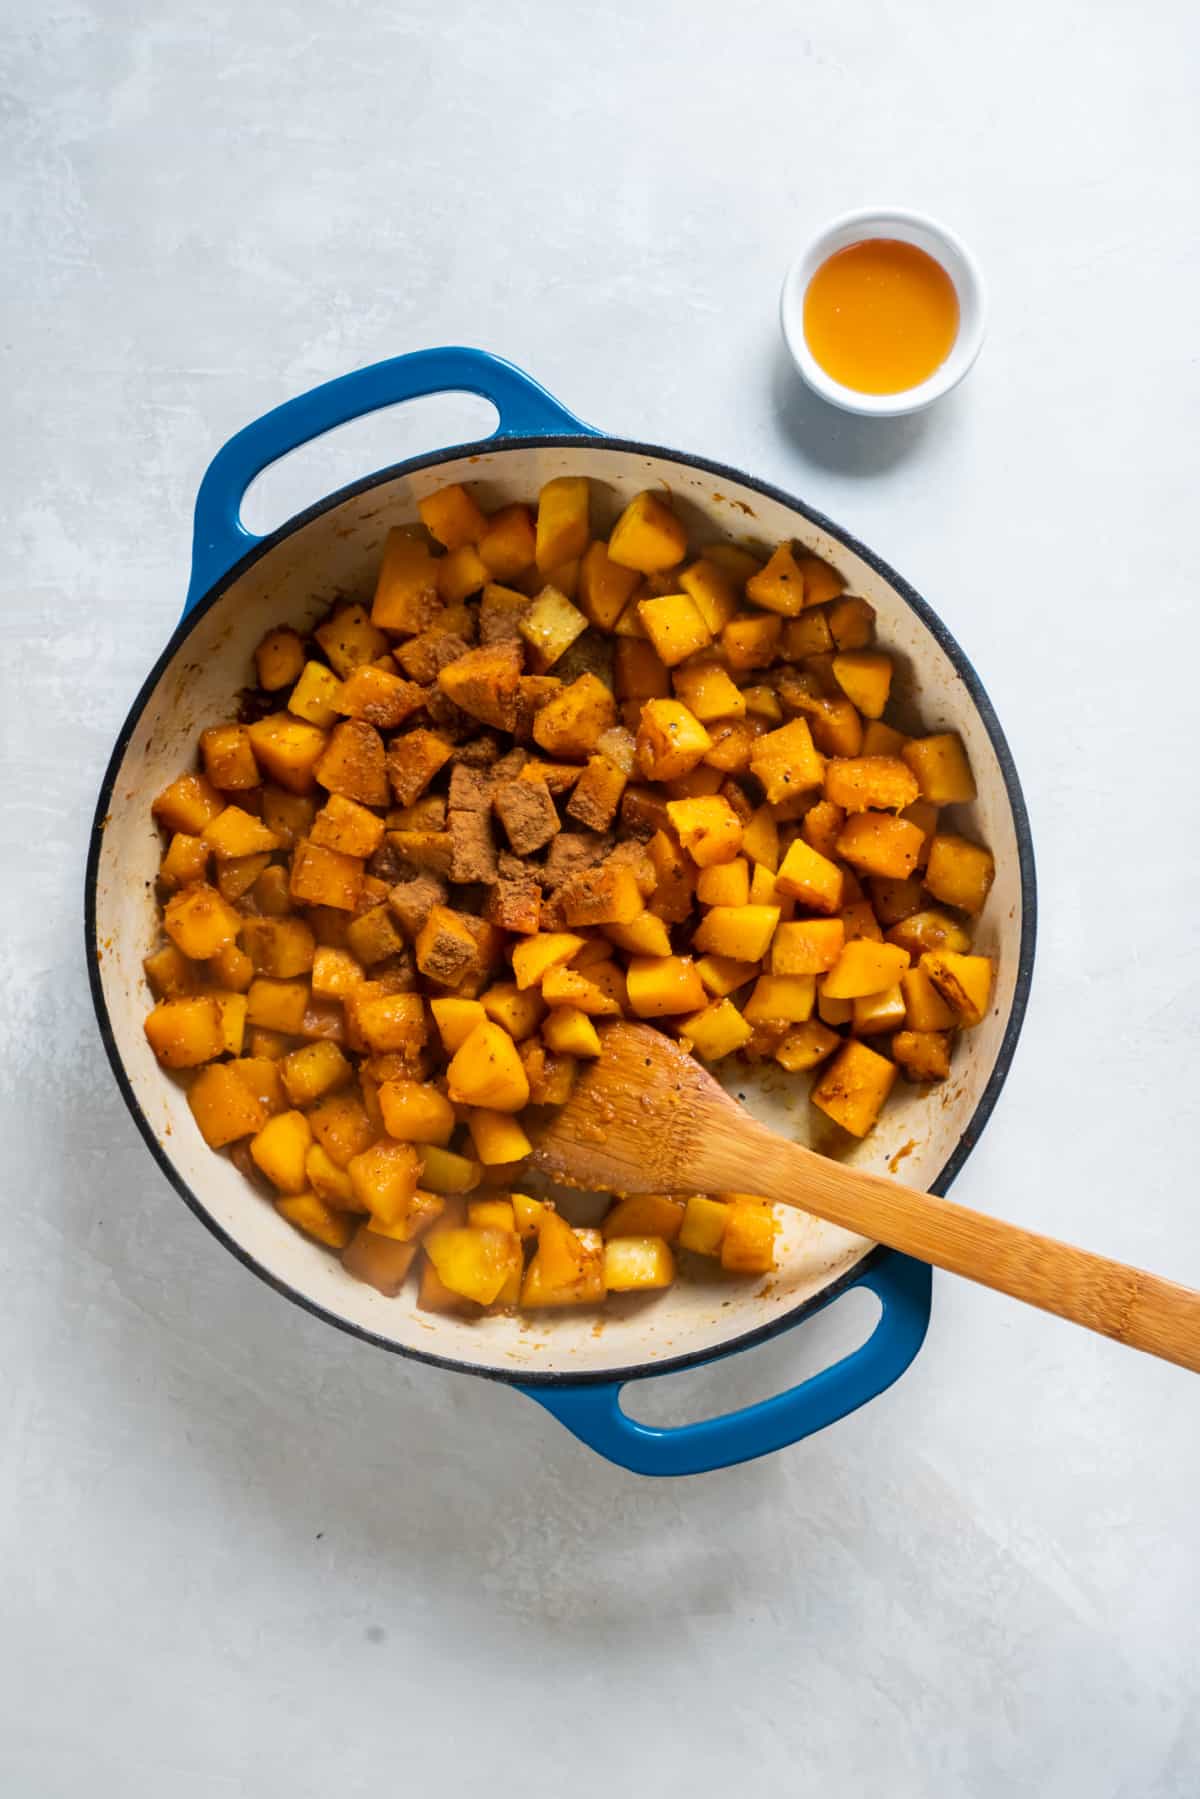 Sauteed butternut squash in a skillet sprinkled with ground cinnamon.